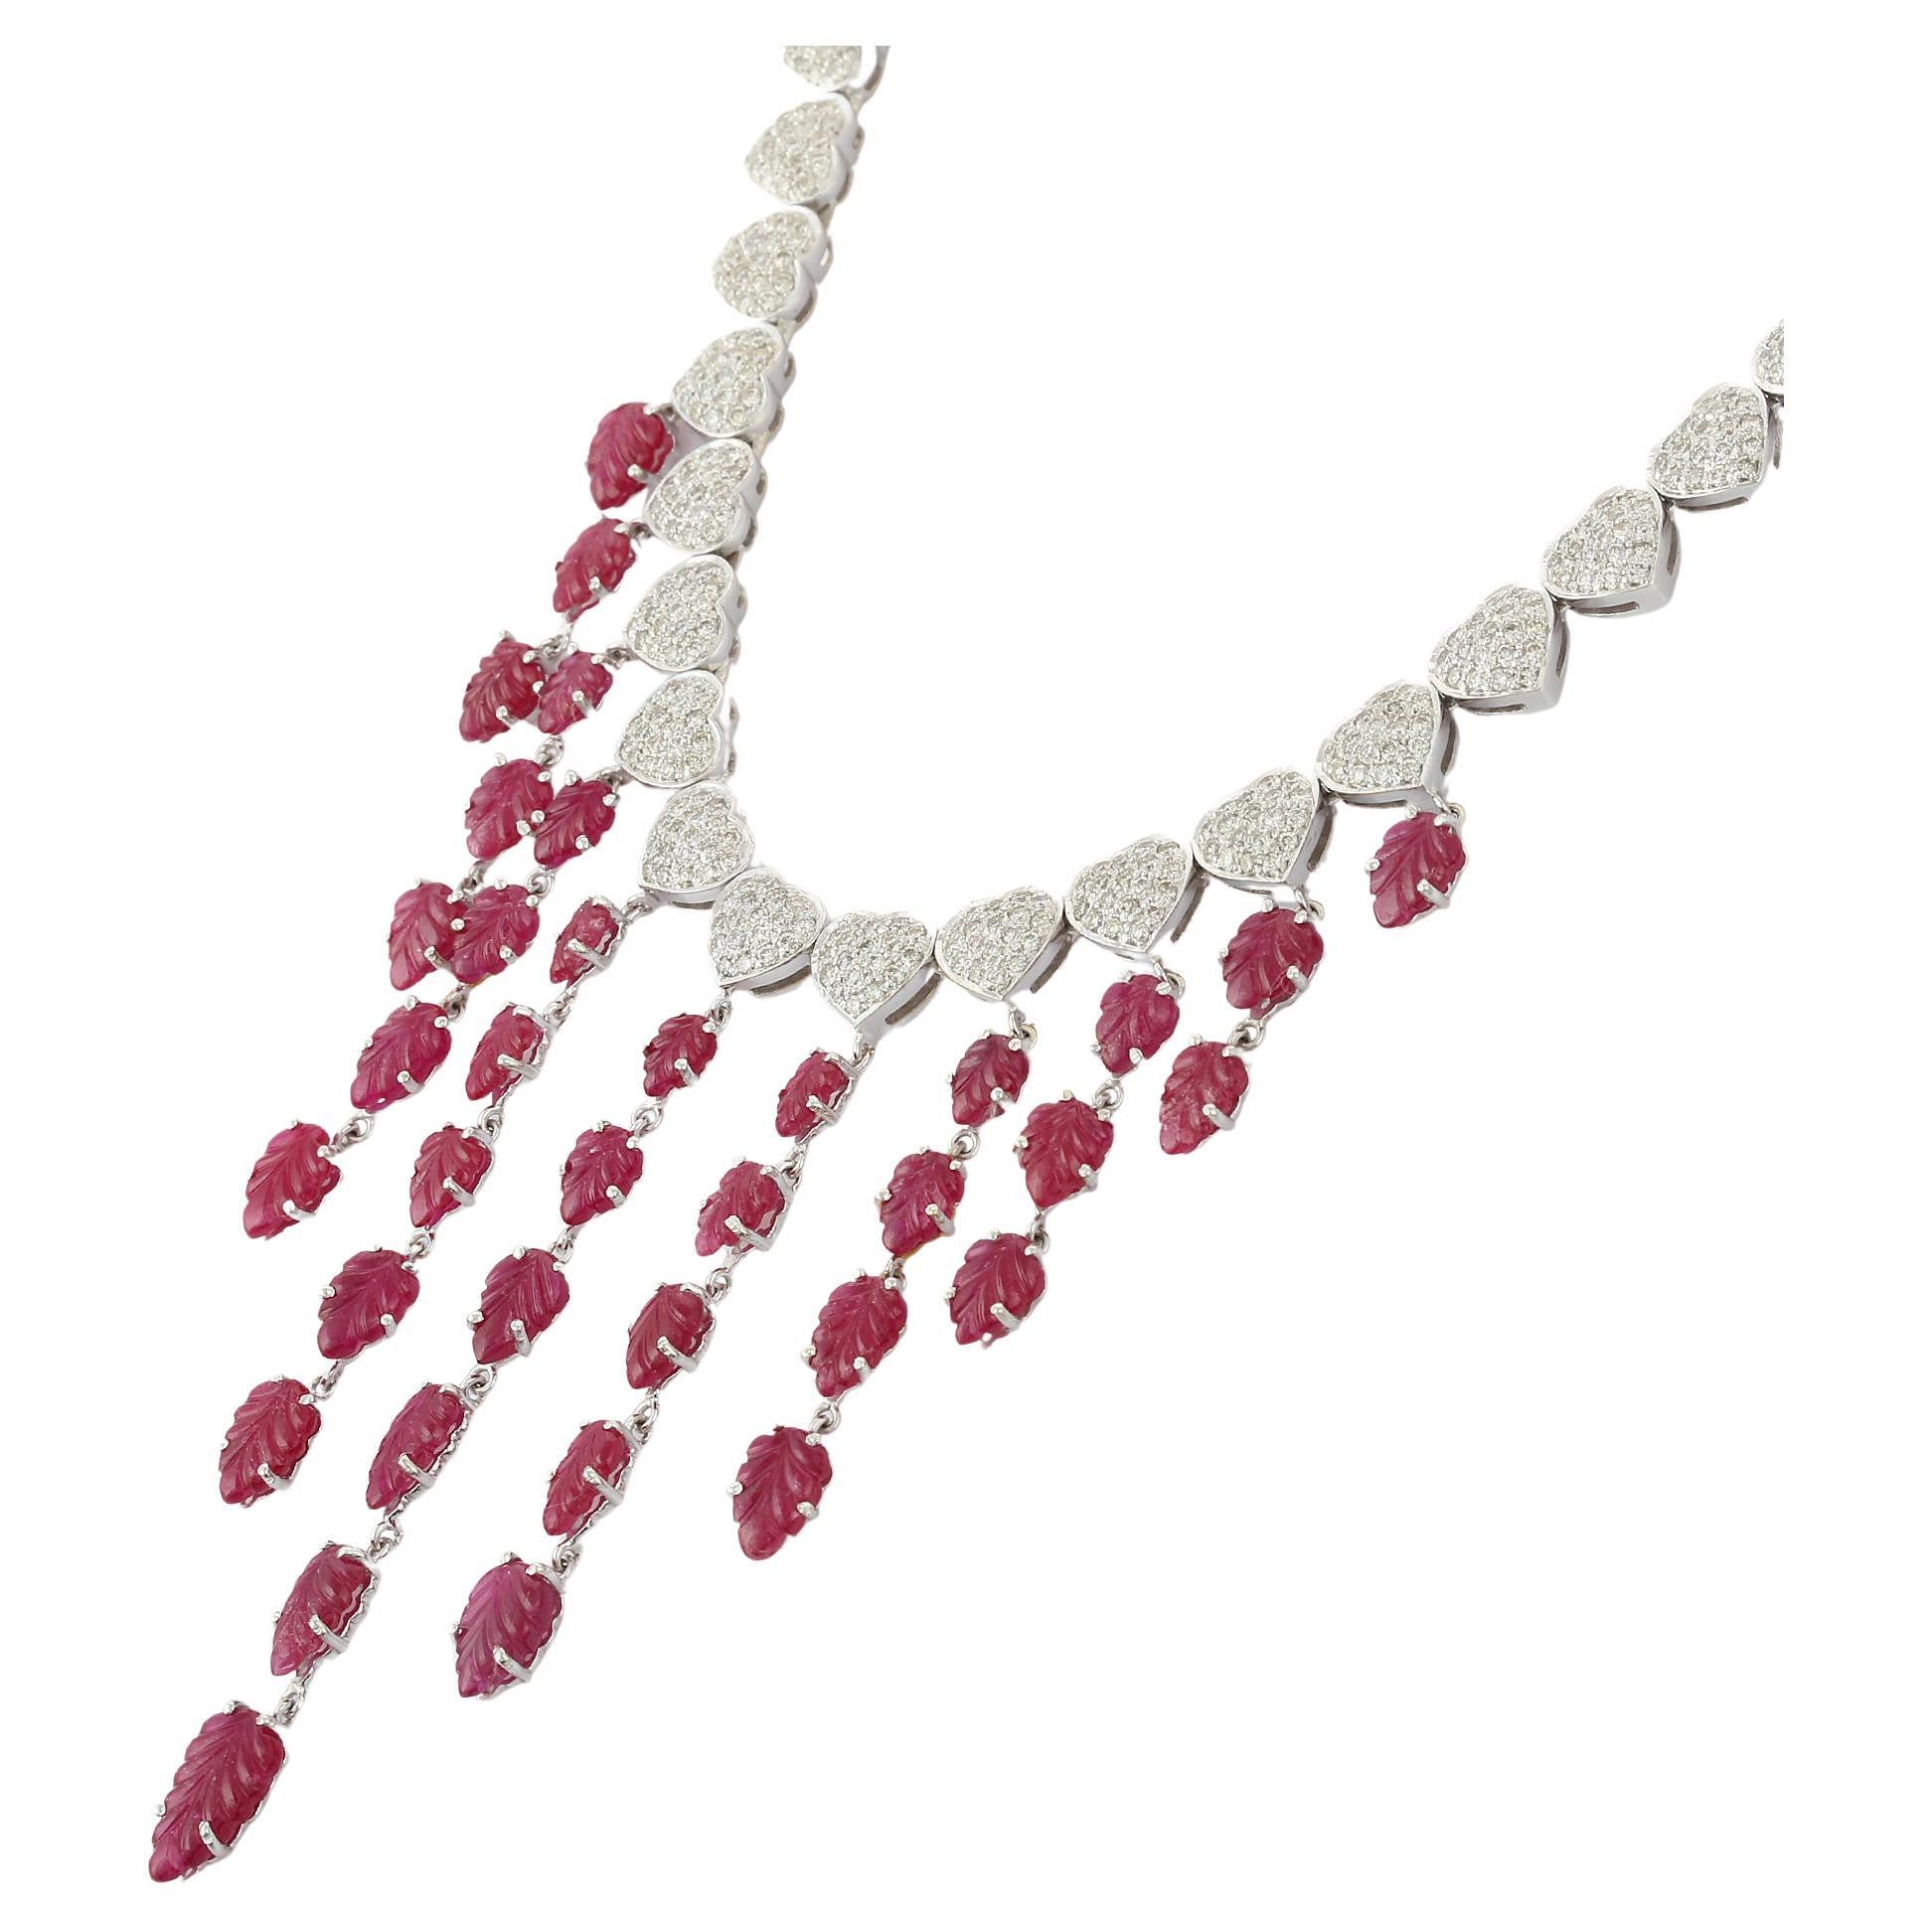 20.5 Carat Ruby and Diamond Drop Necklace in 18K White Gold